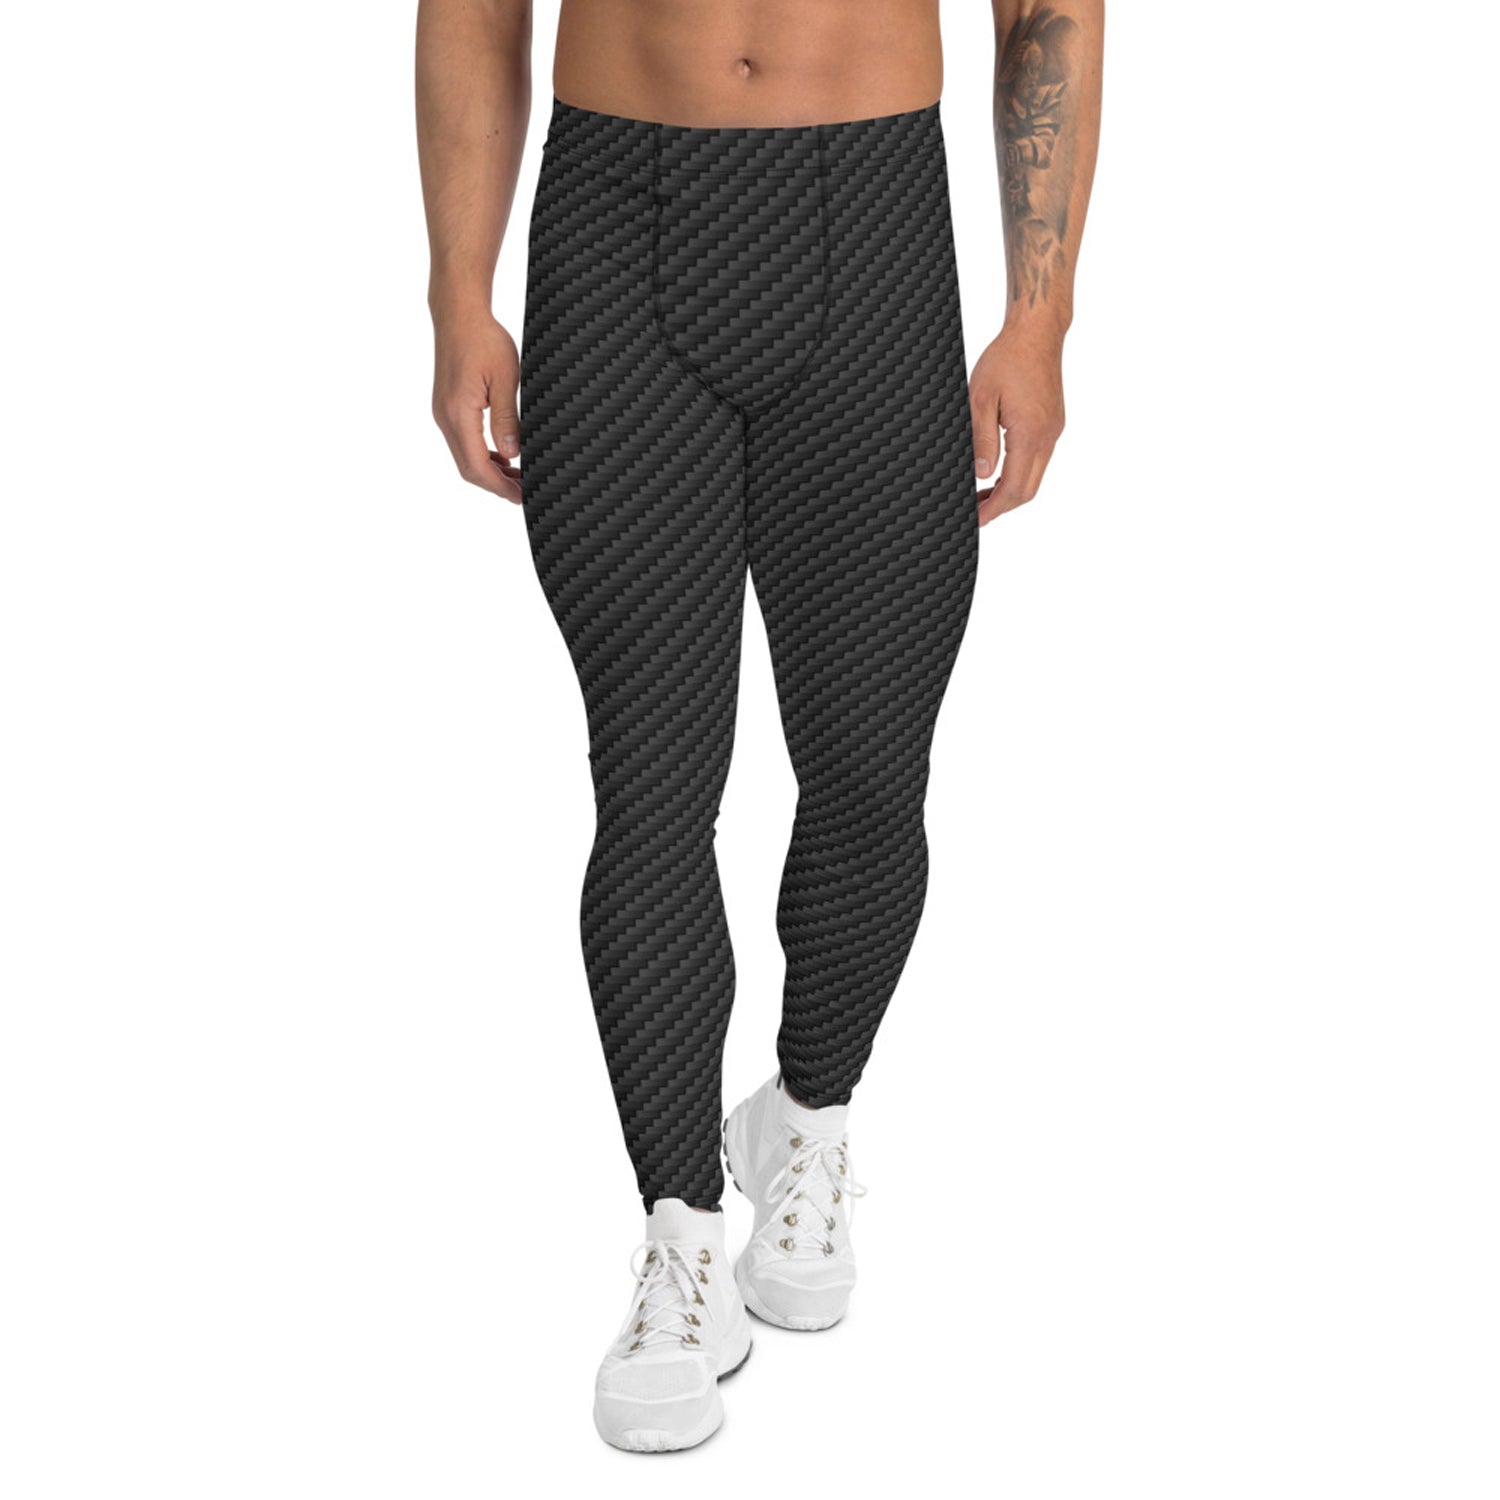 Carbon Fiber Men's Leggings – Found By Me - Everyday Clothing & Accessories